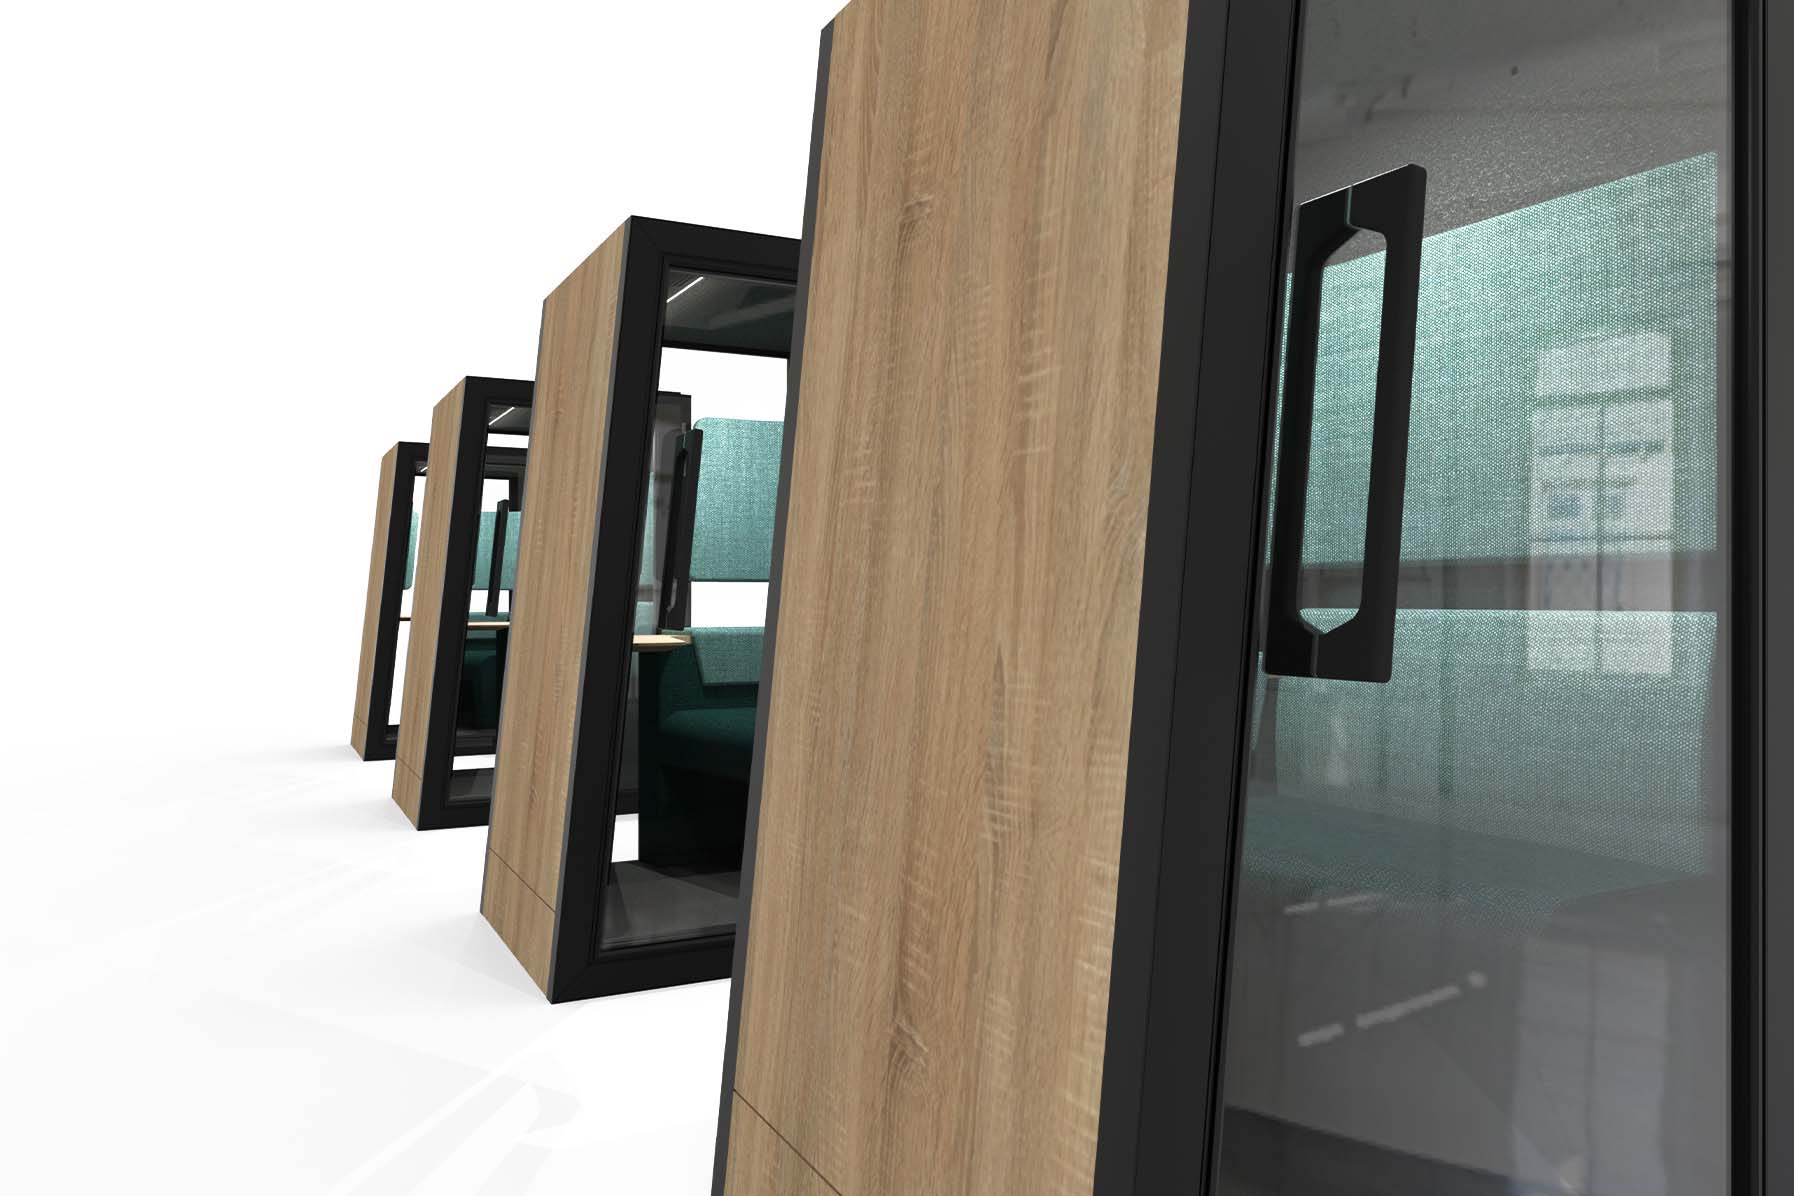 On the QT Modular Office Phone Booth & Pods - Steelcase